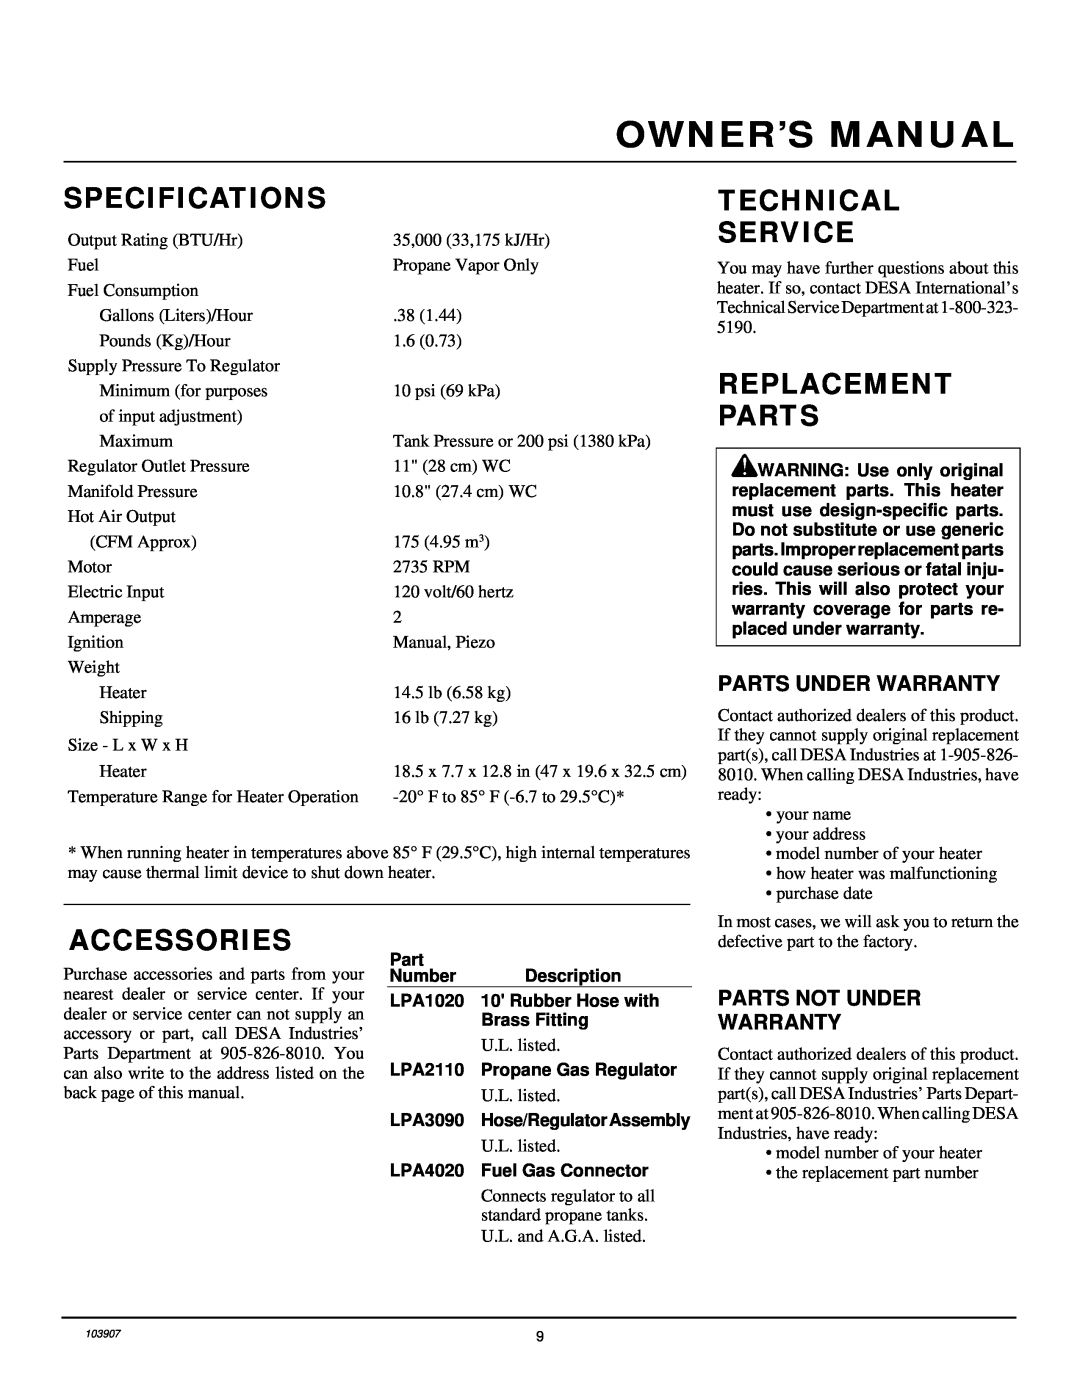 Desa RCLP35B owner manual Specifications, Technical Service, Replacement Parts, Accessories 